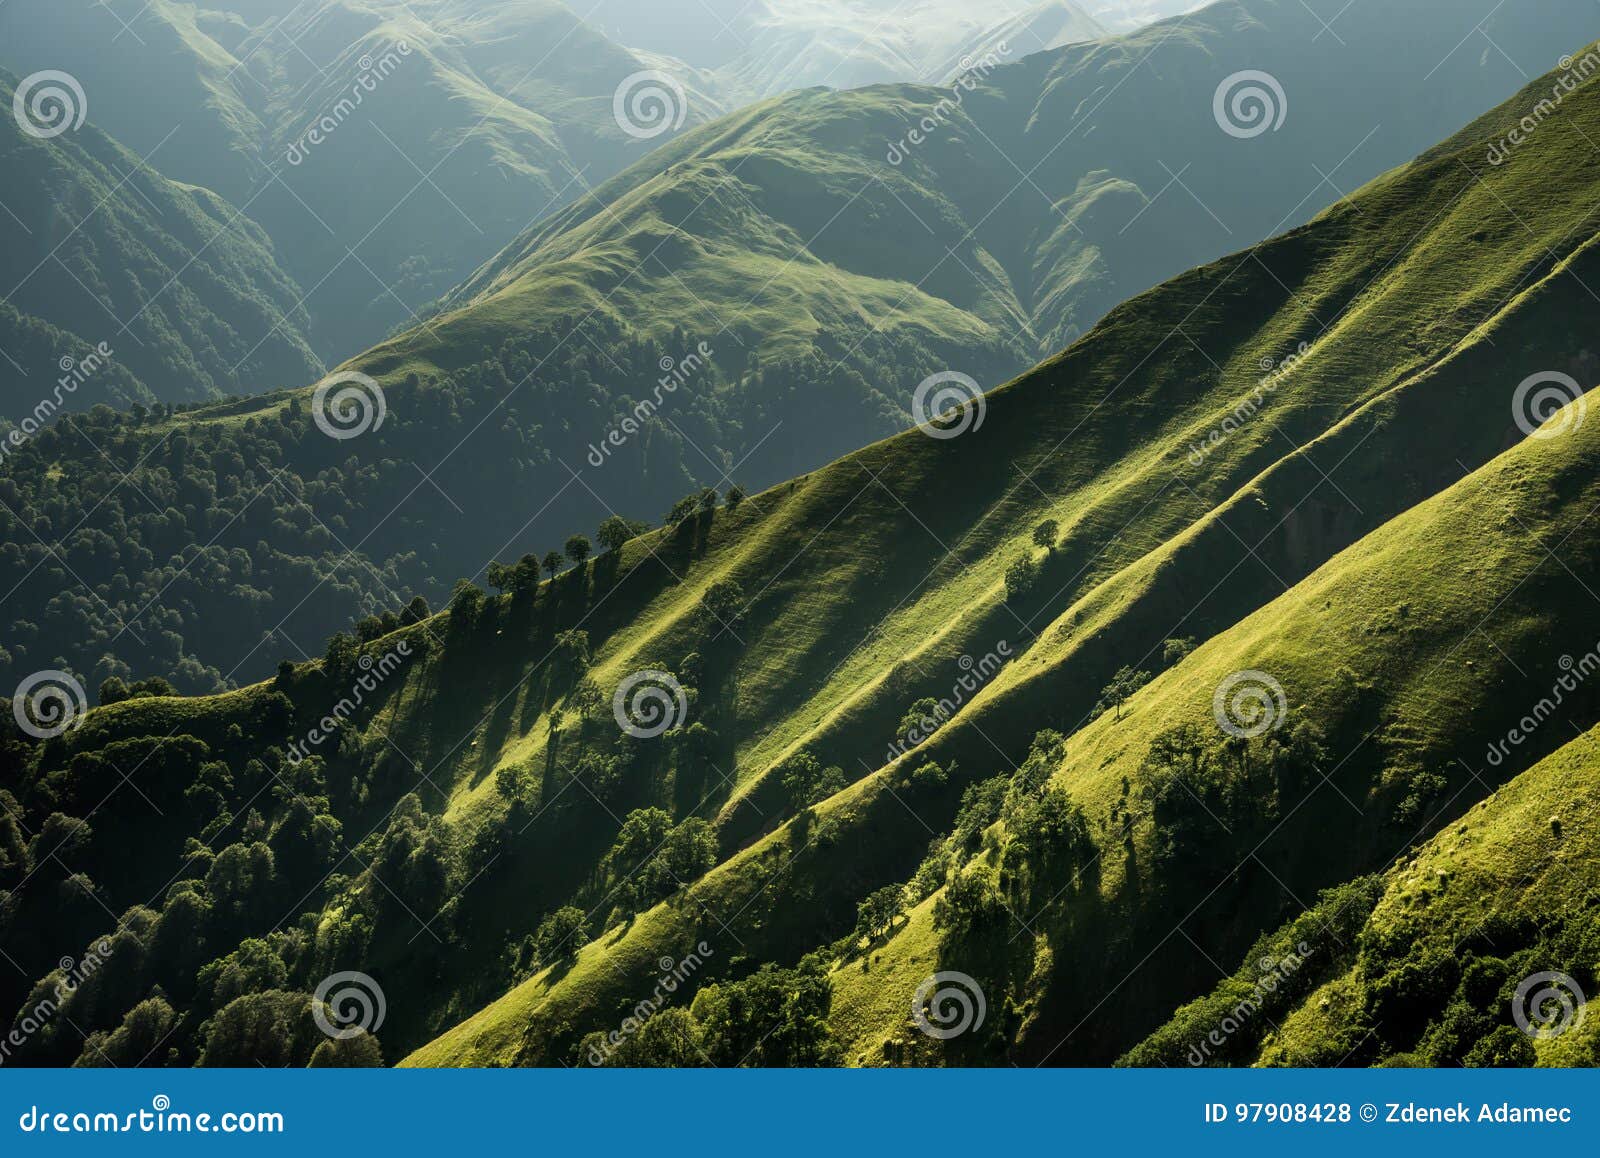 green mountain hillsides with trees, pastures, meadows and deep valleys in region tusheti